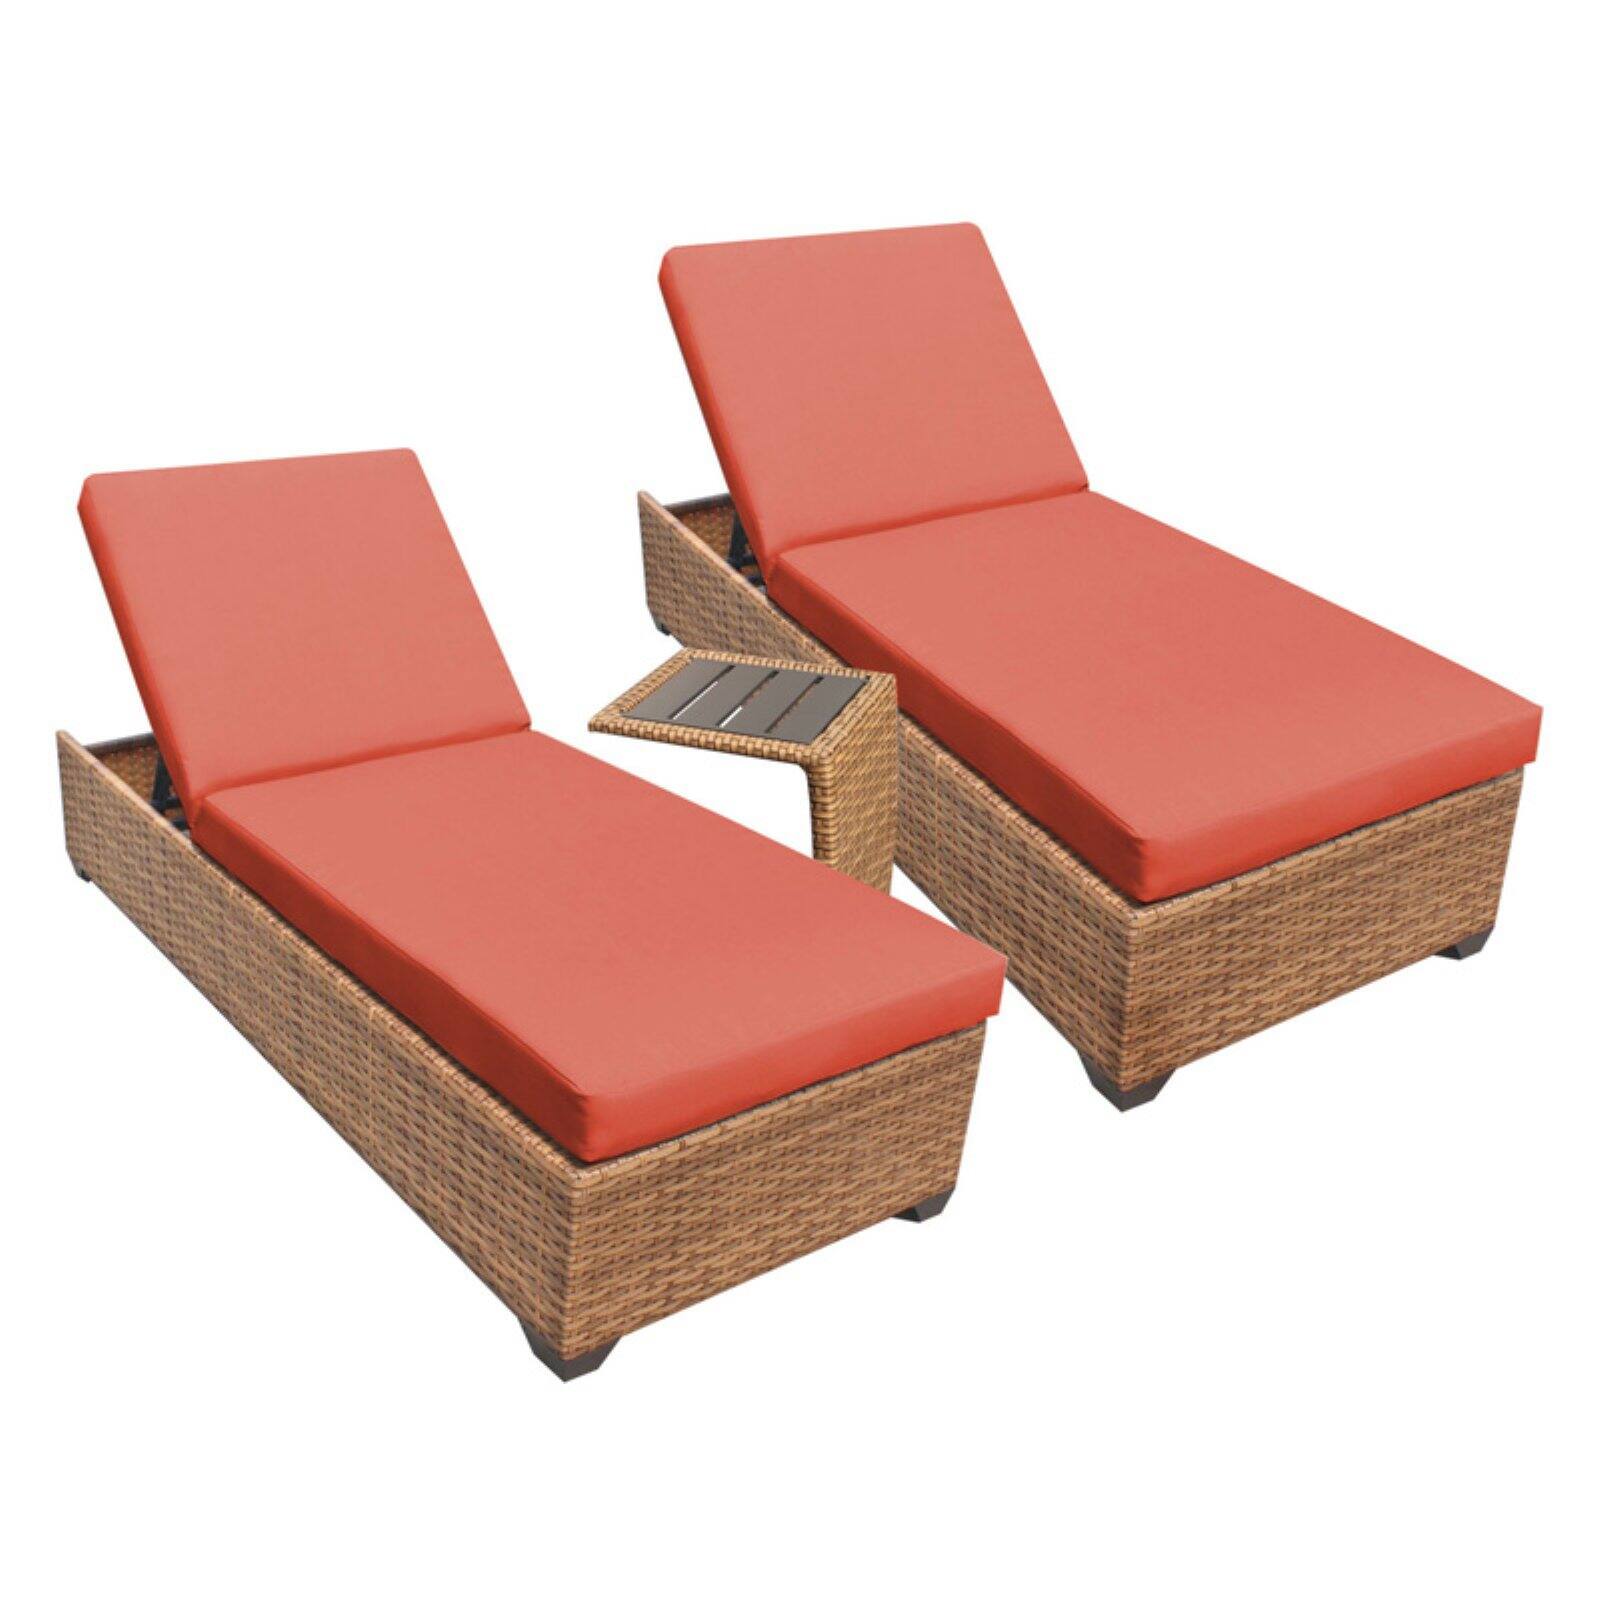 TK Classics Laguna Outdoor Chaise Lounge with Side Table - Set of 2 Chairs and Cushion Covers - image 1 of 2